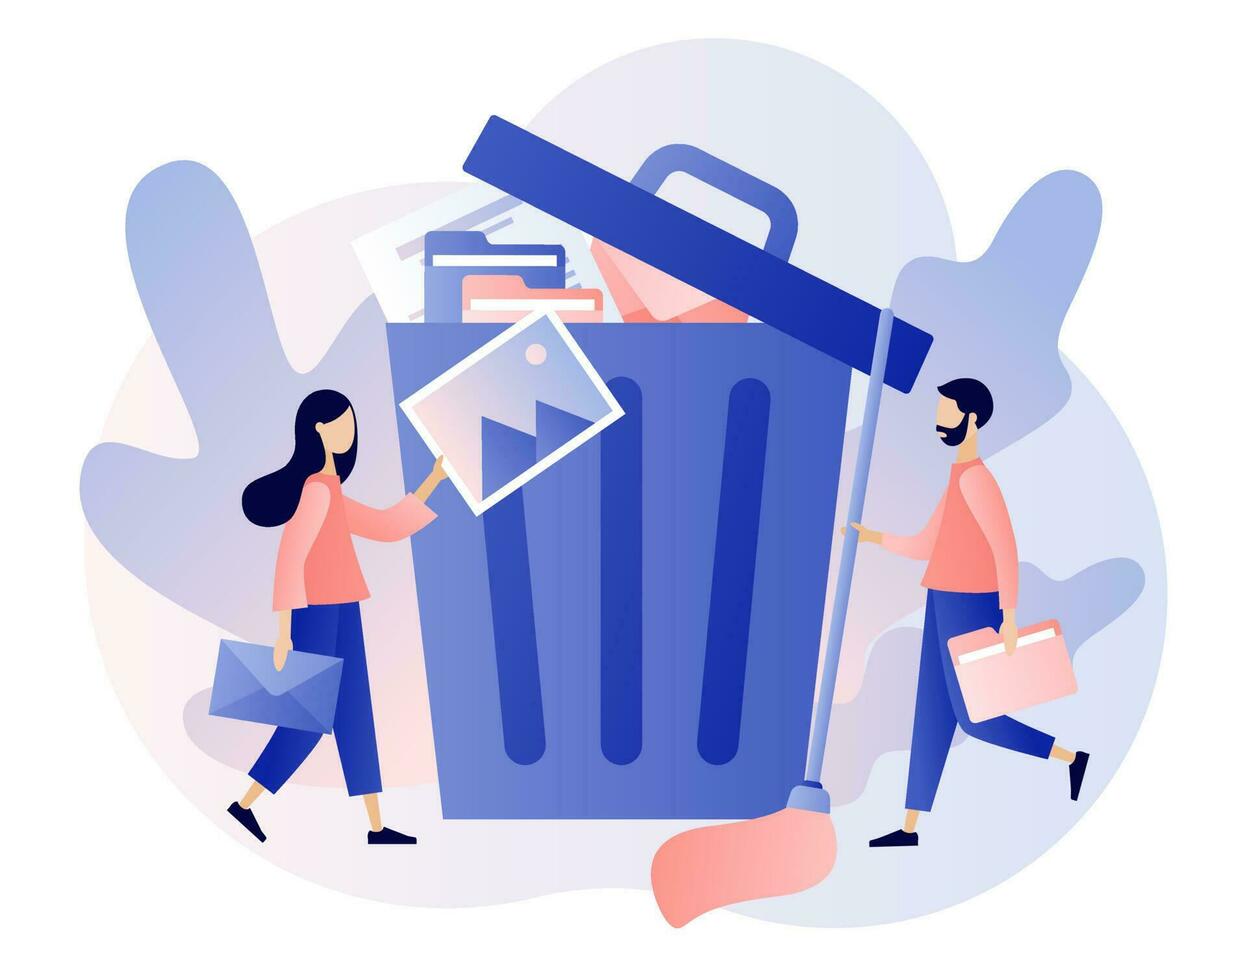 Tiny people deleting file and move unnecessary files to the big trash bin. Delete concept. Cleaning digital memory. Modern flat cartoon style. Vector illustration on white background